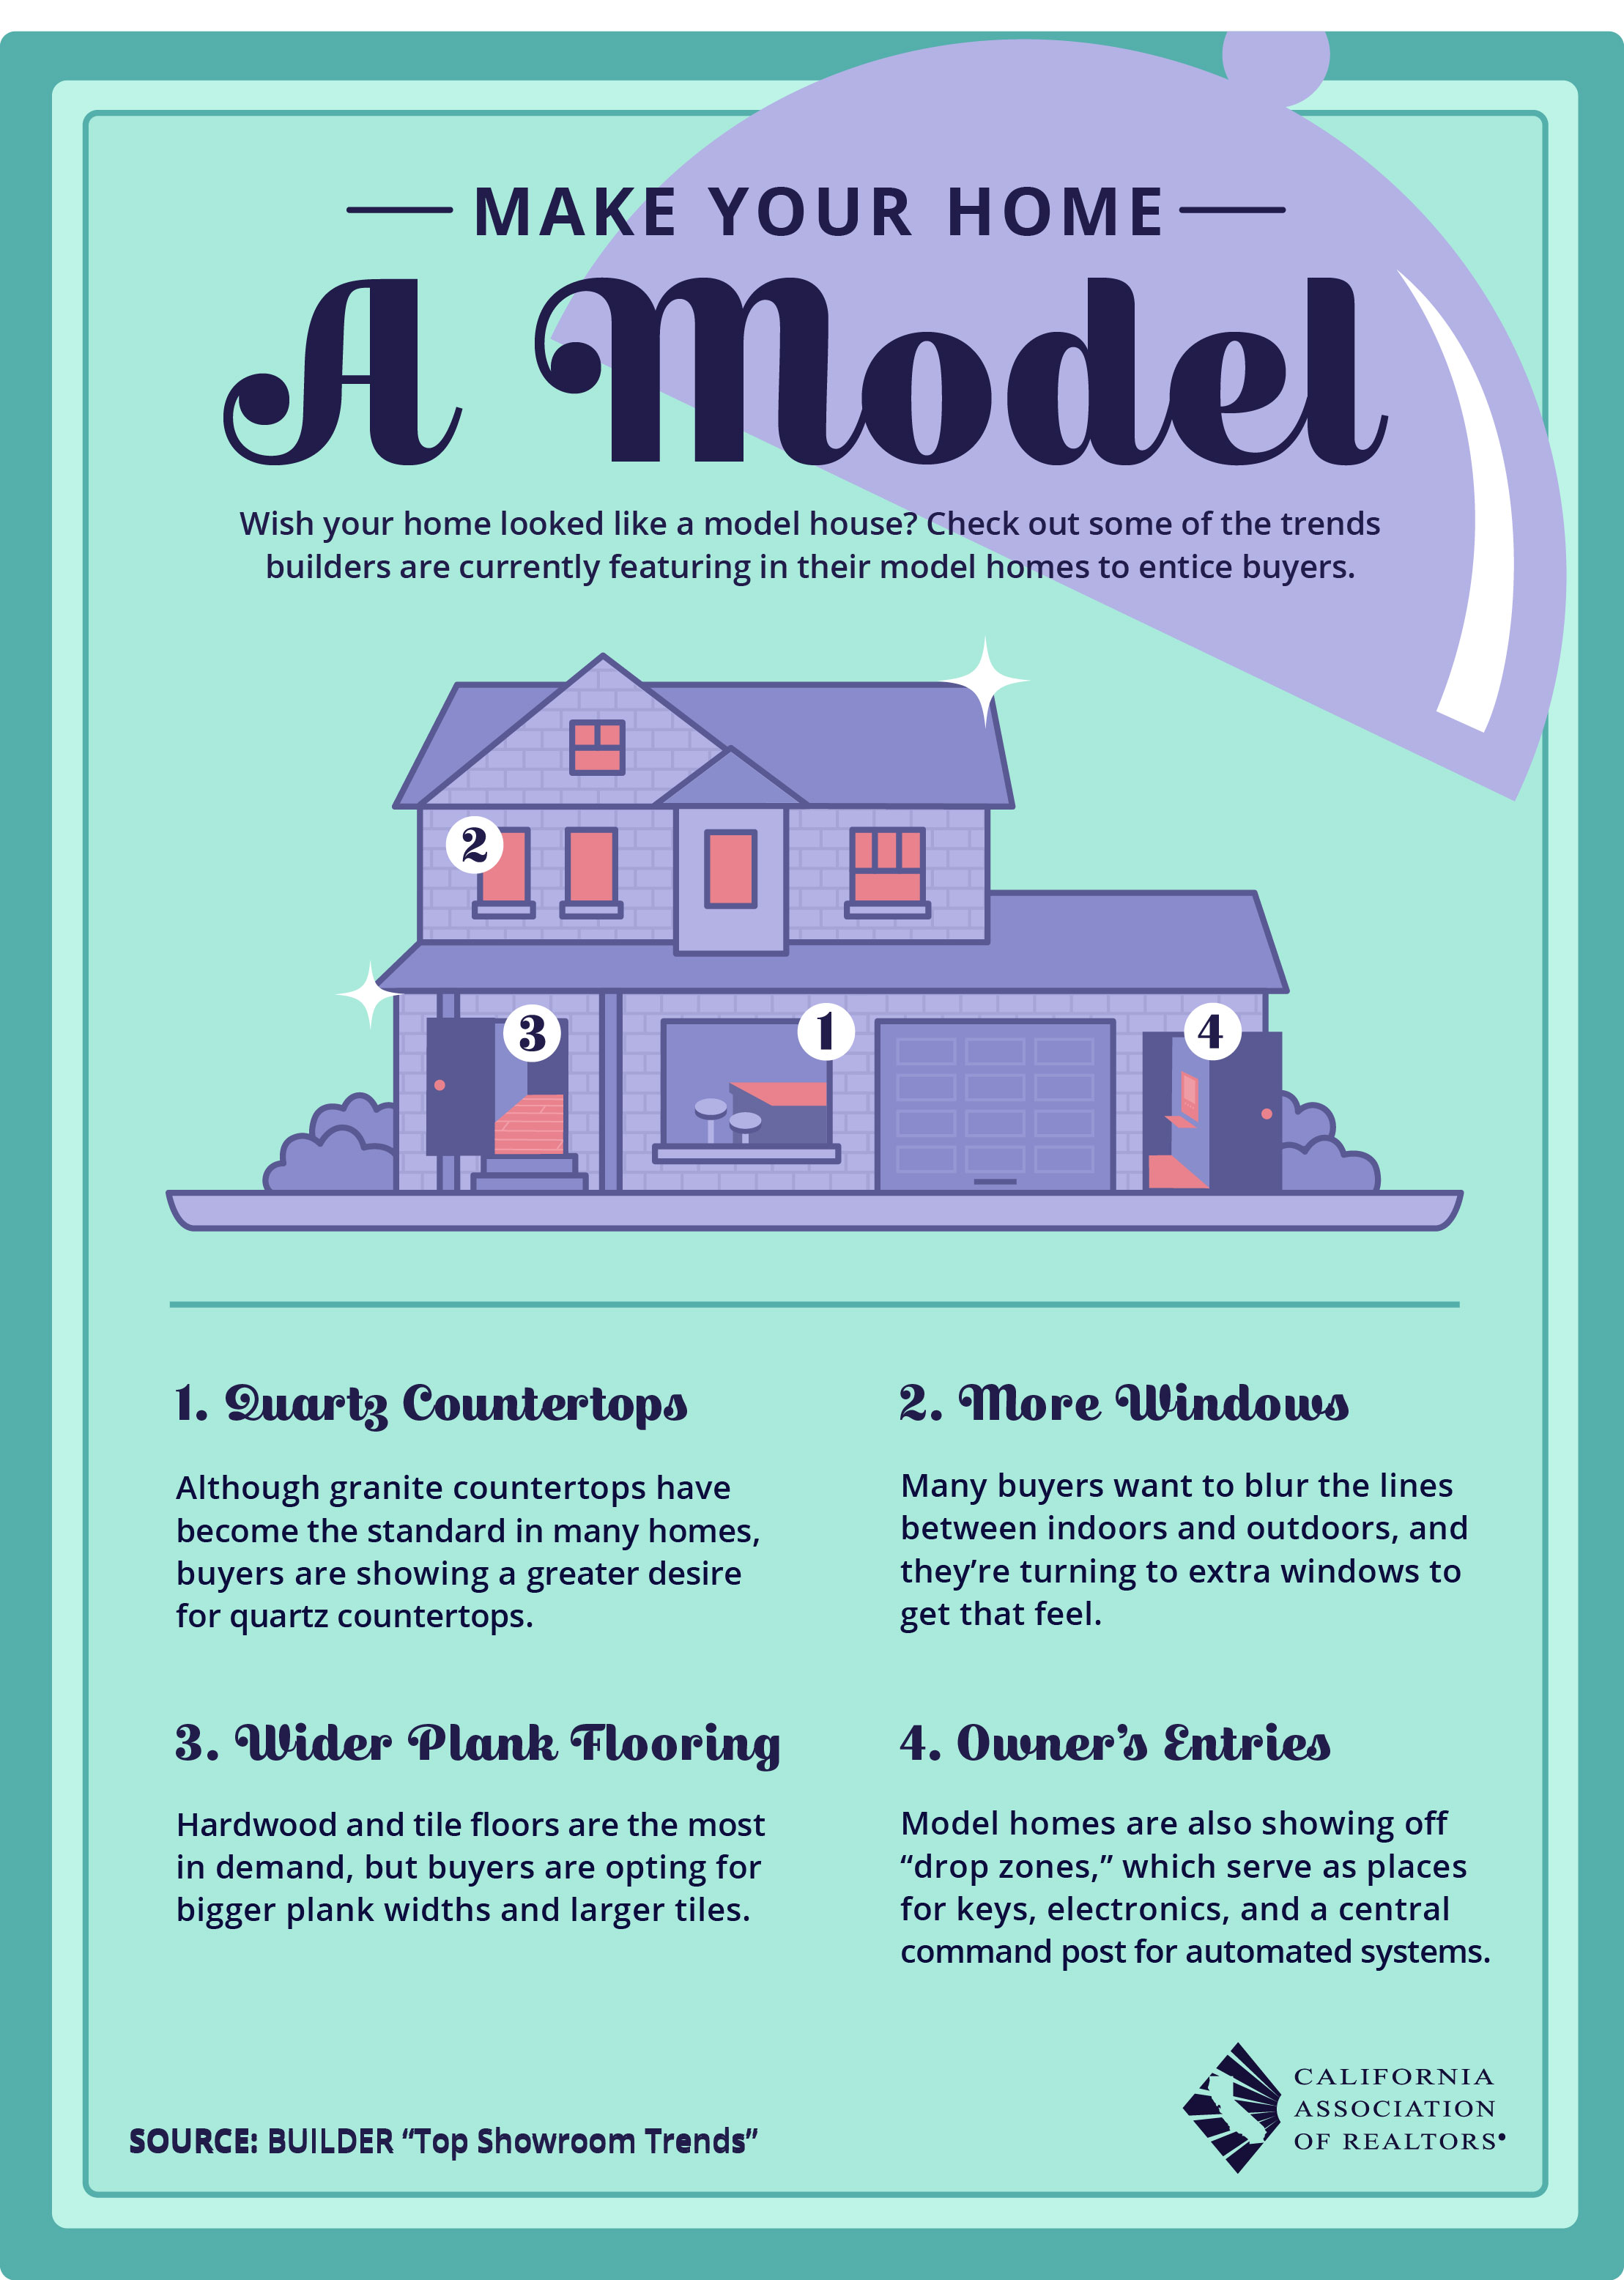 Wish your home looked like a model house? Check out some of the trends builders are currently featuring in their model homes to entice buyers.